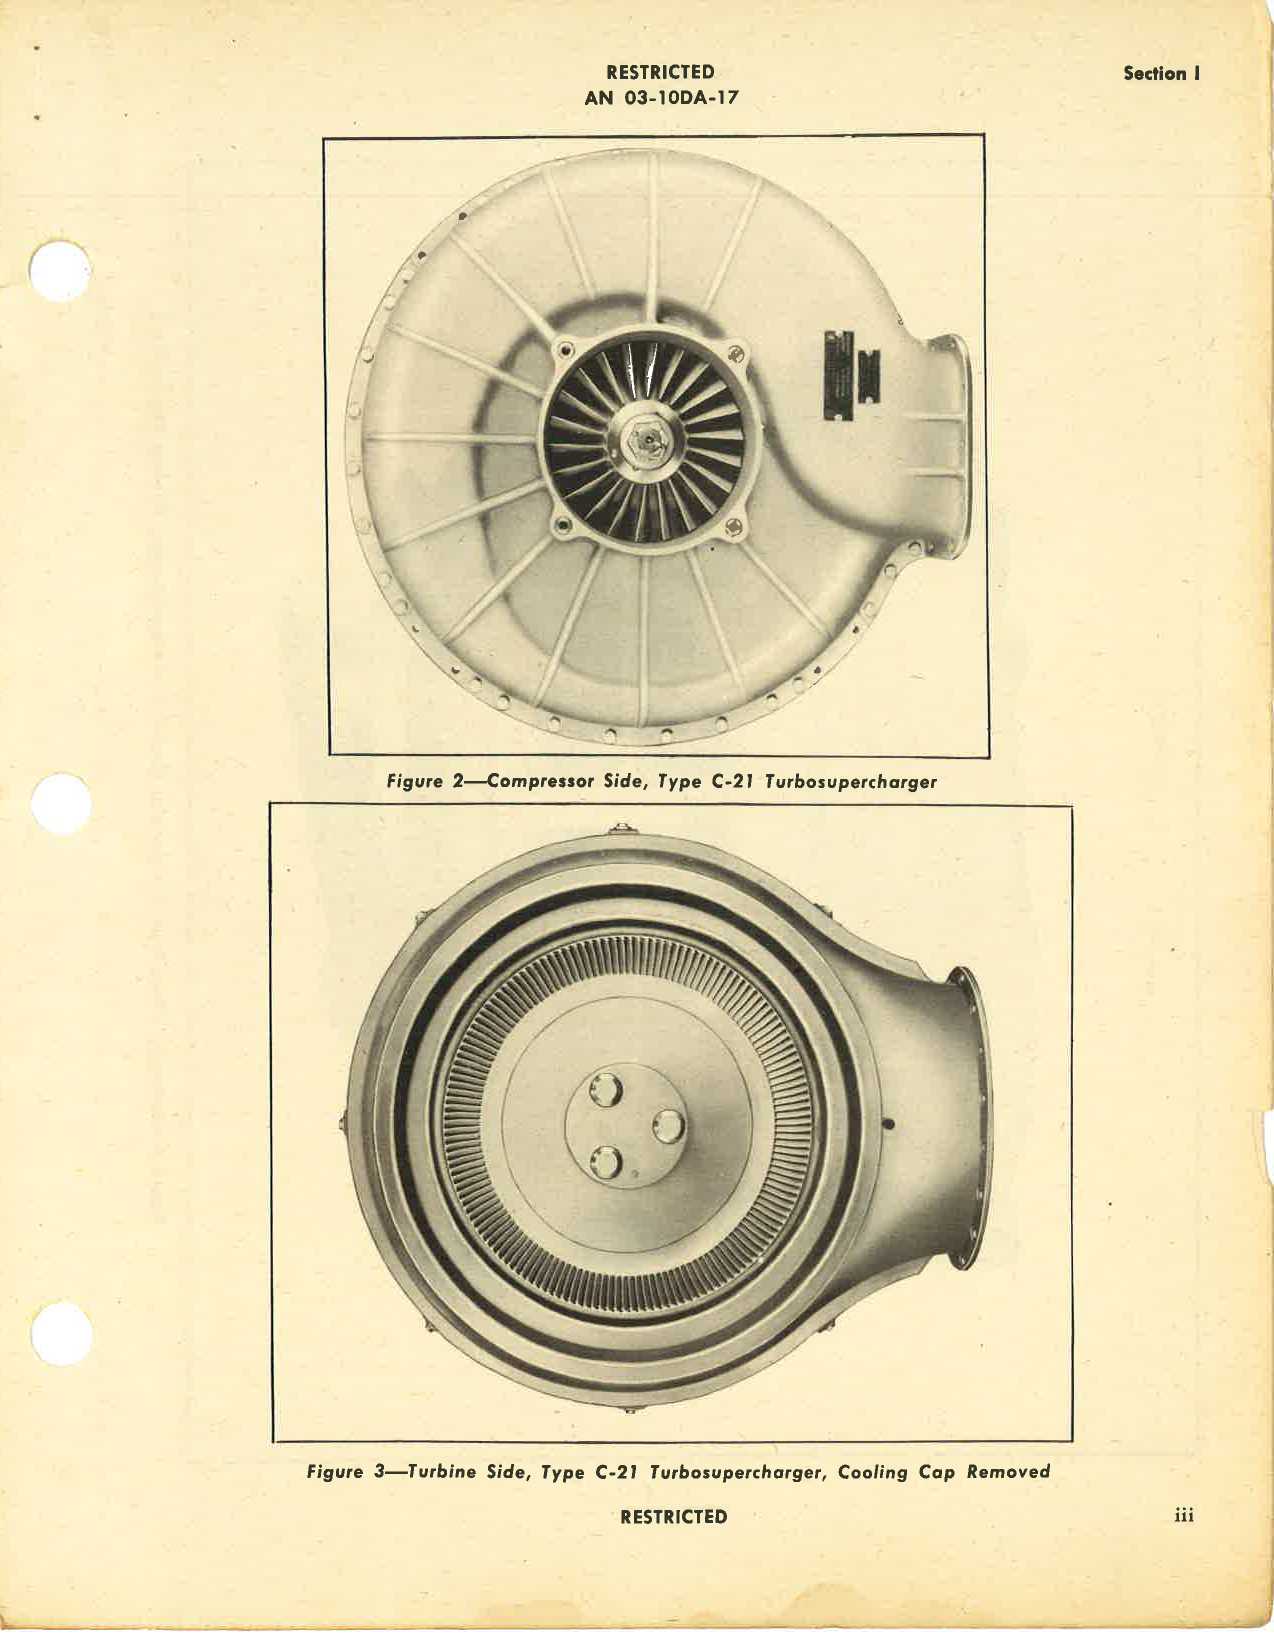 Sample page 5 from AirCorps Library document: Operation, Service, & Overhaul Instructions with Parts Catalog for Turbosuperchargers Type C